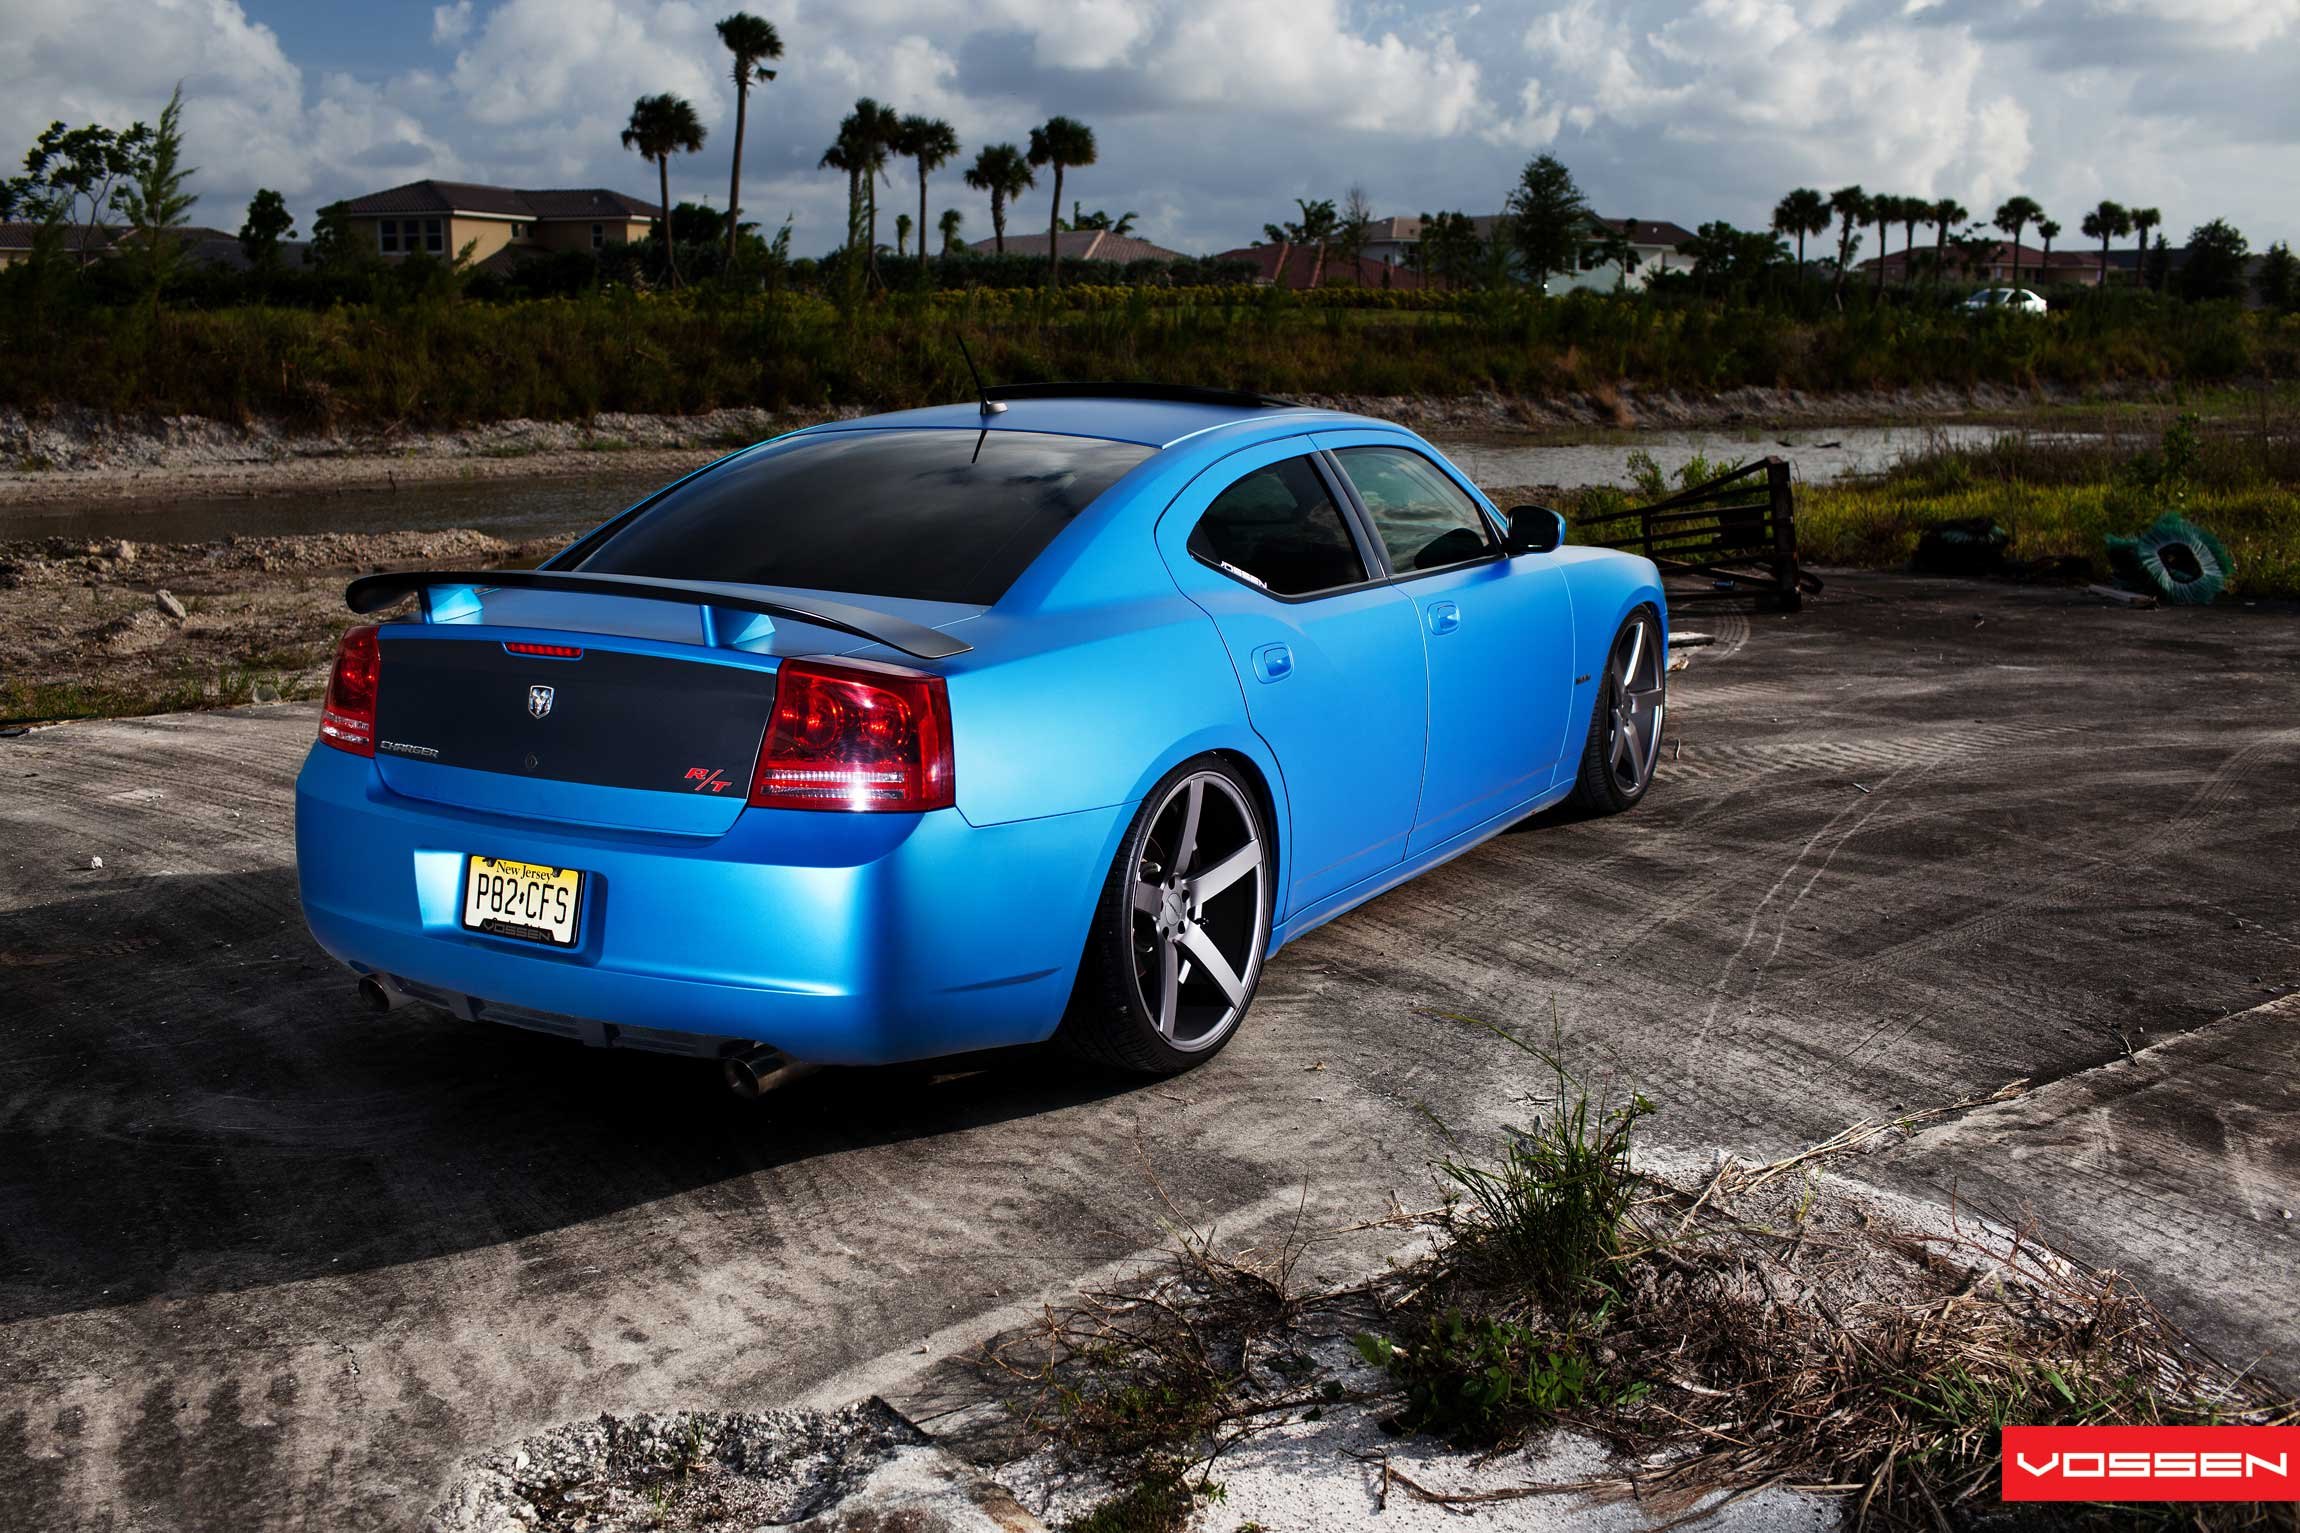 Custon Wing Spoiler on Blue Dodge Charger - Photo by Vossen